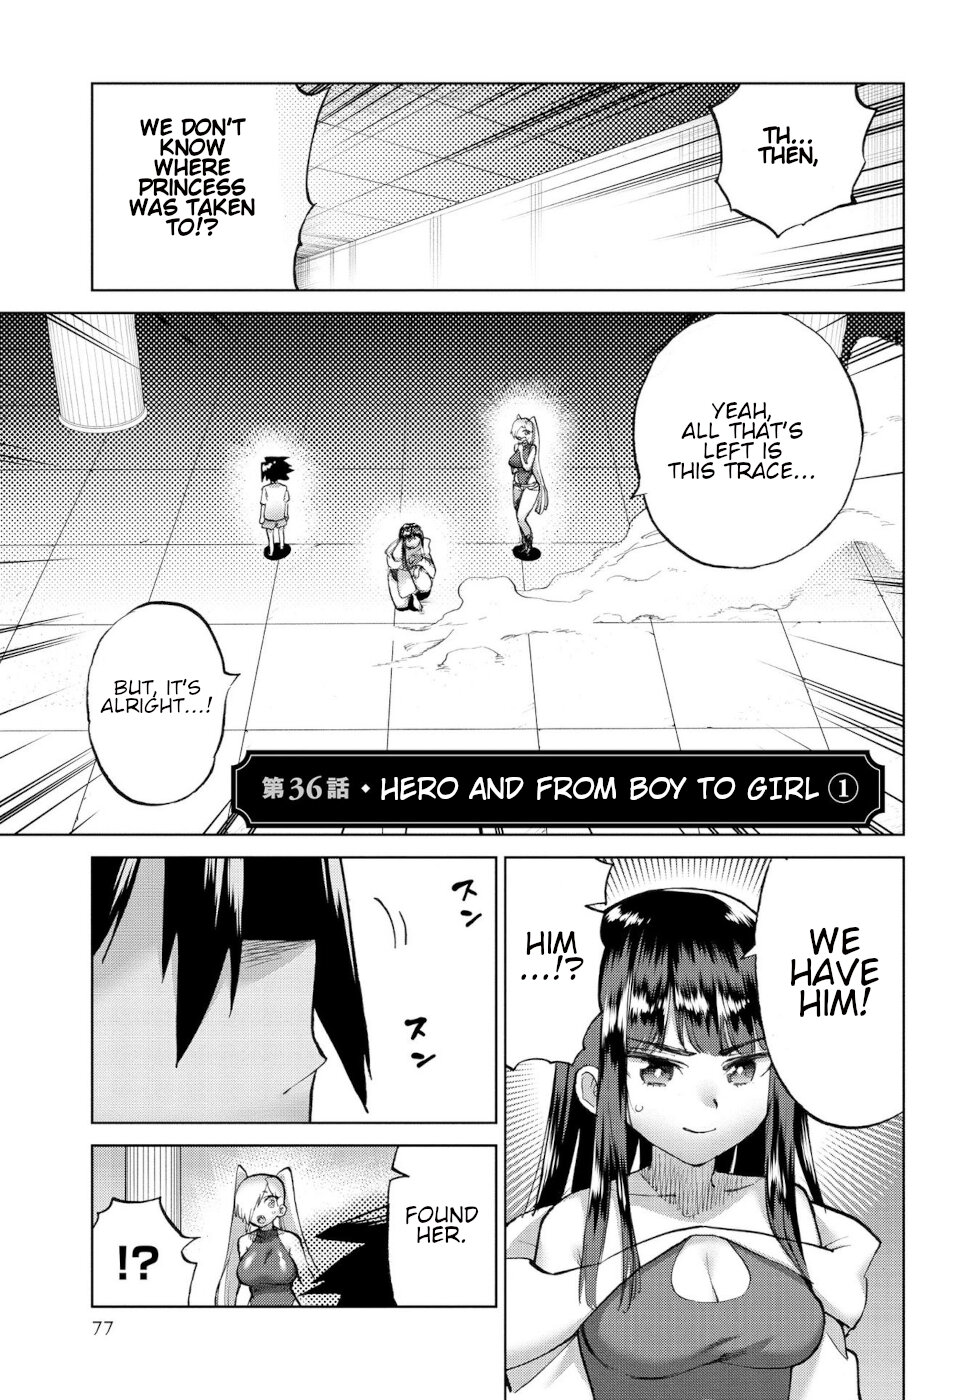 The Hero And The Demon King's Romcom Vol.5 Chapter 36: Hero And From Boy To Girl - Picture 1